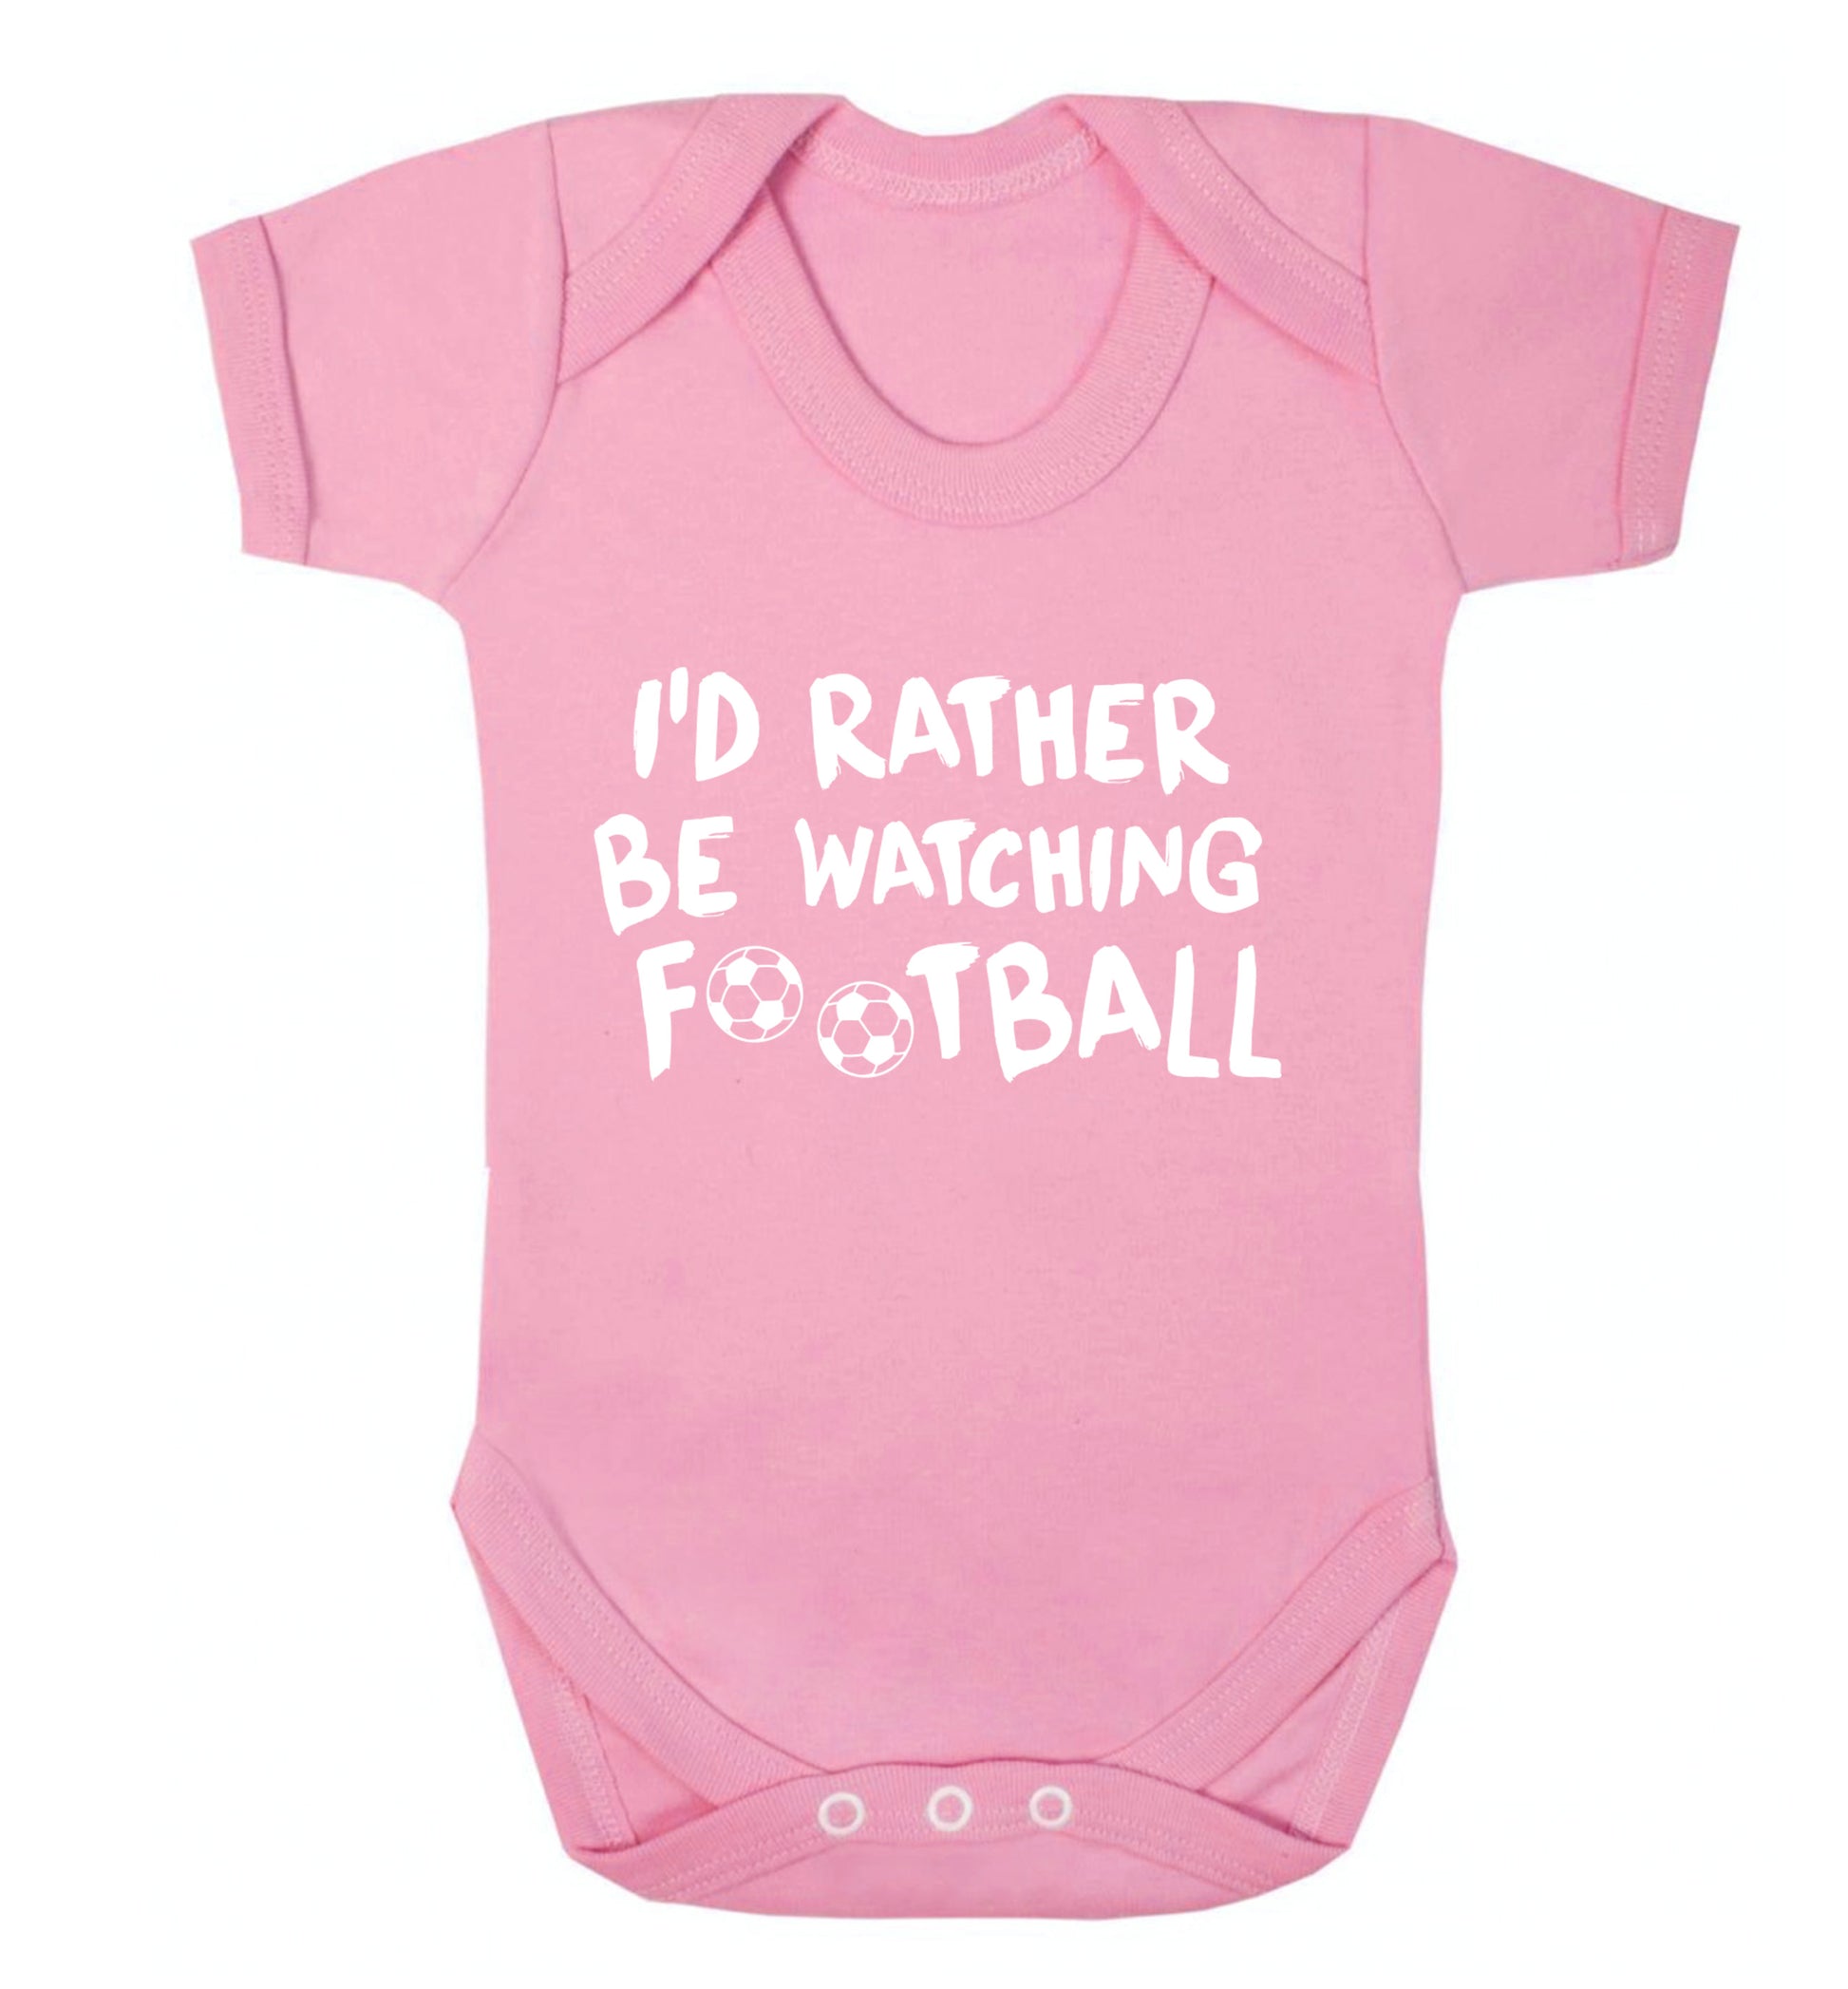 I'd rather be watching football Baby Vest pale pink 18-24 months